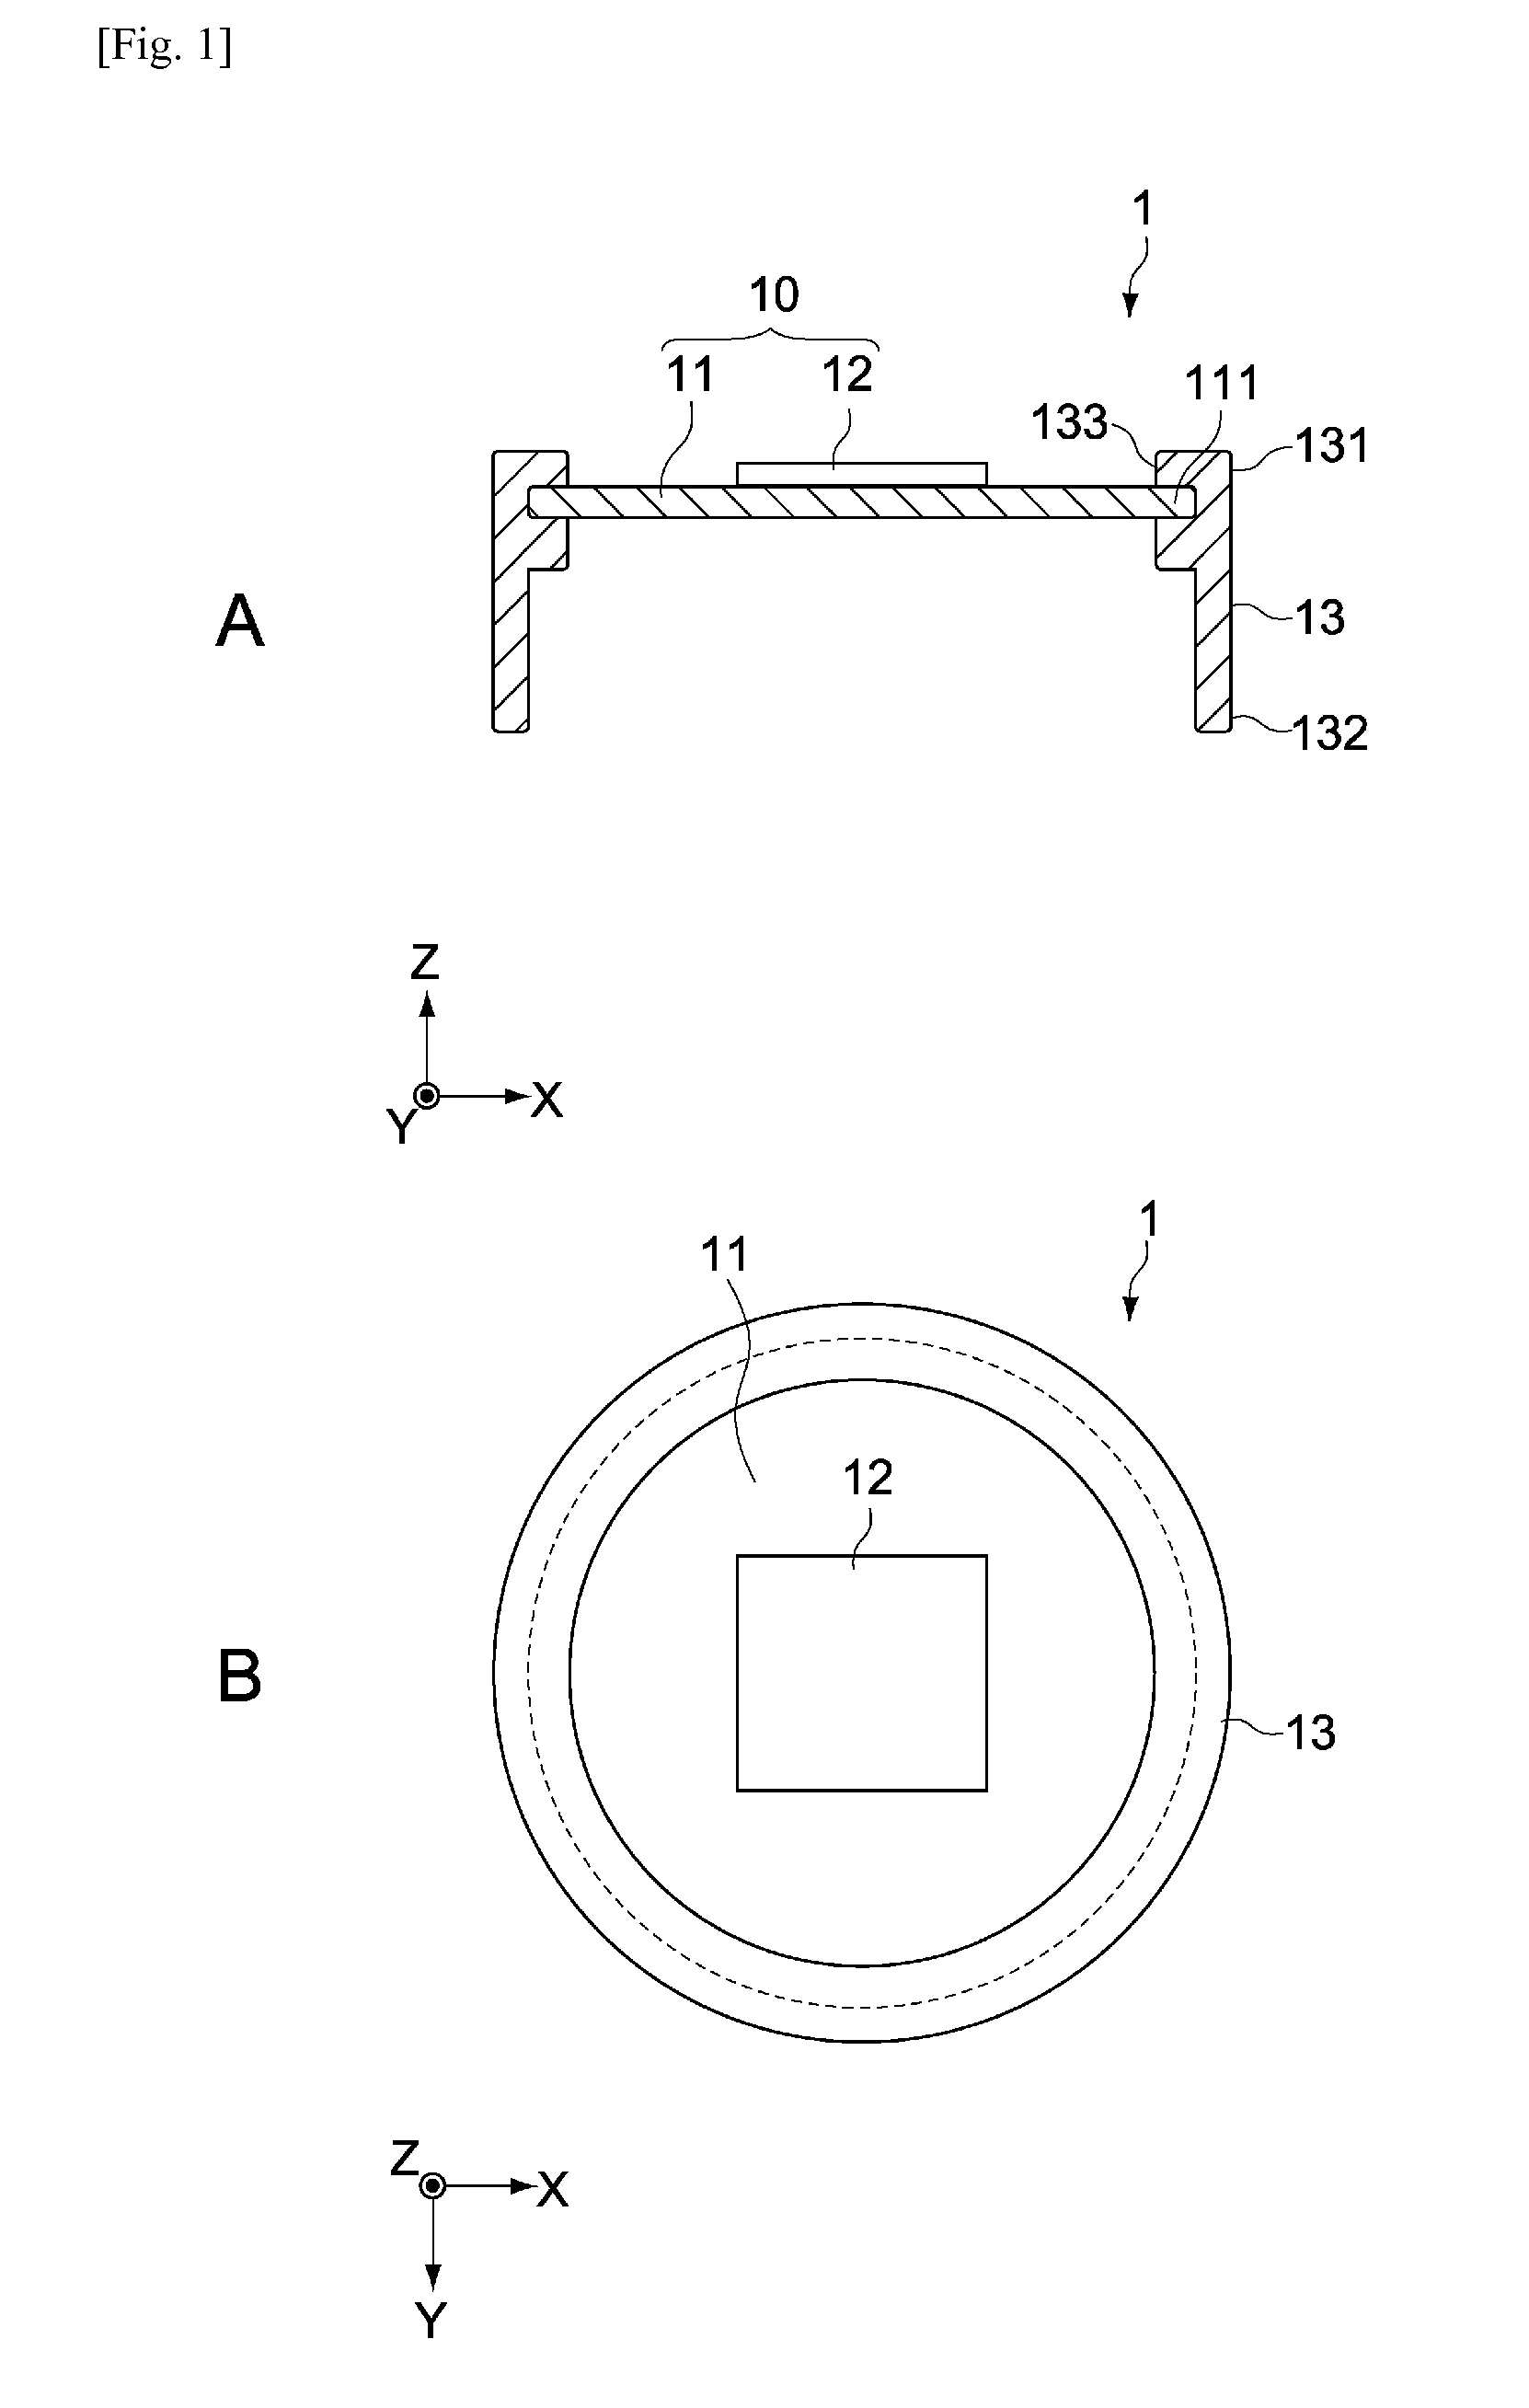 Electroacoustic transducer